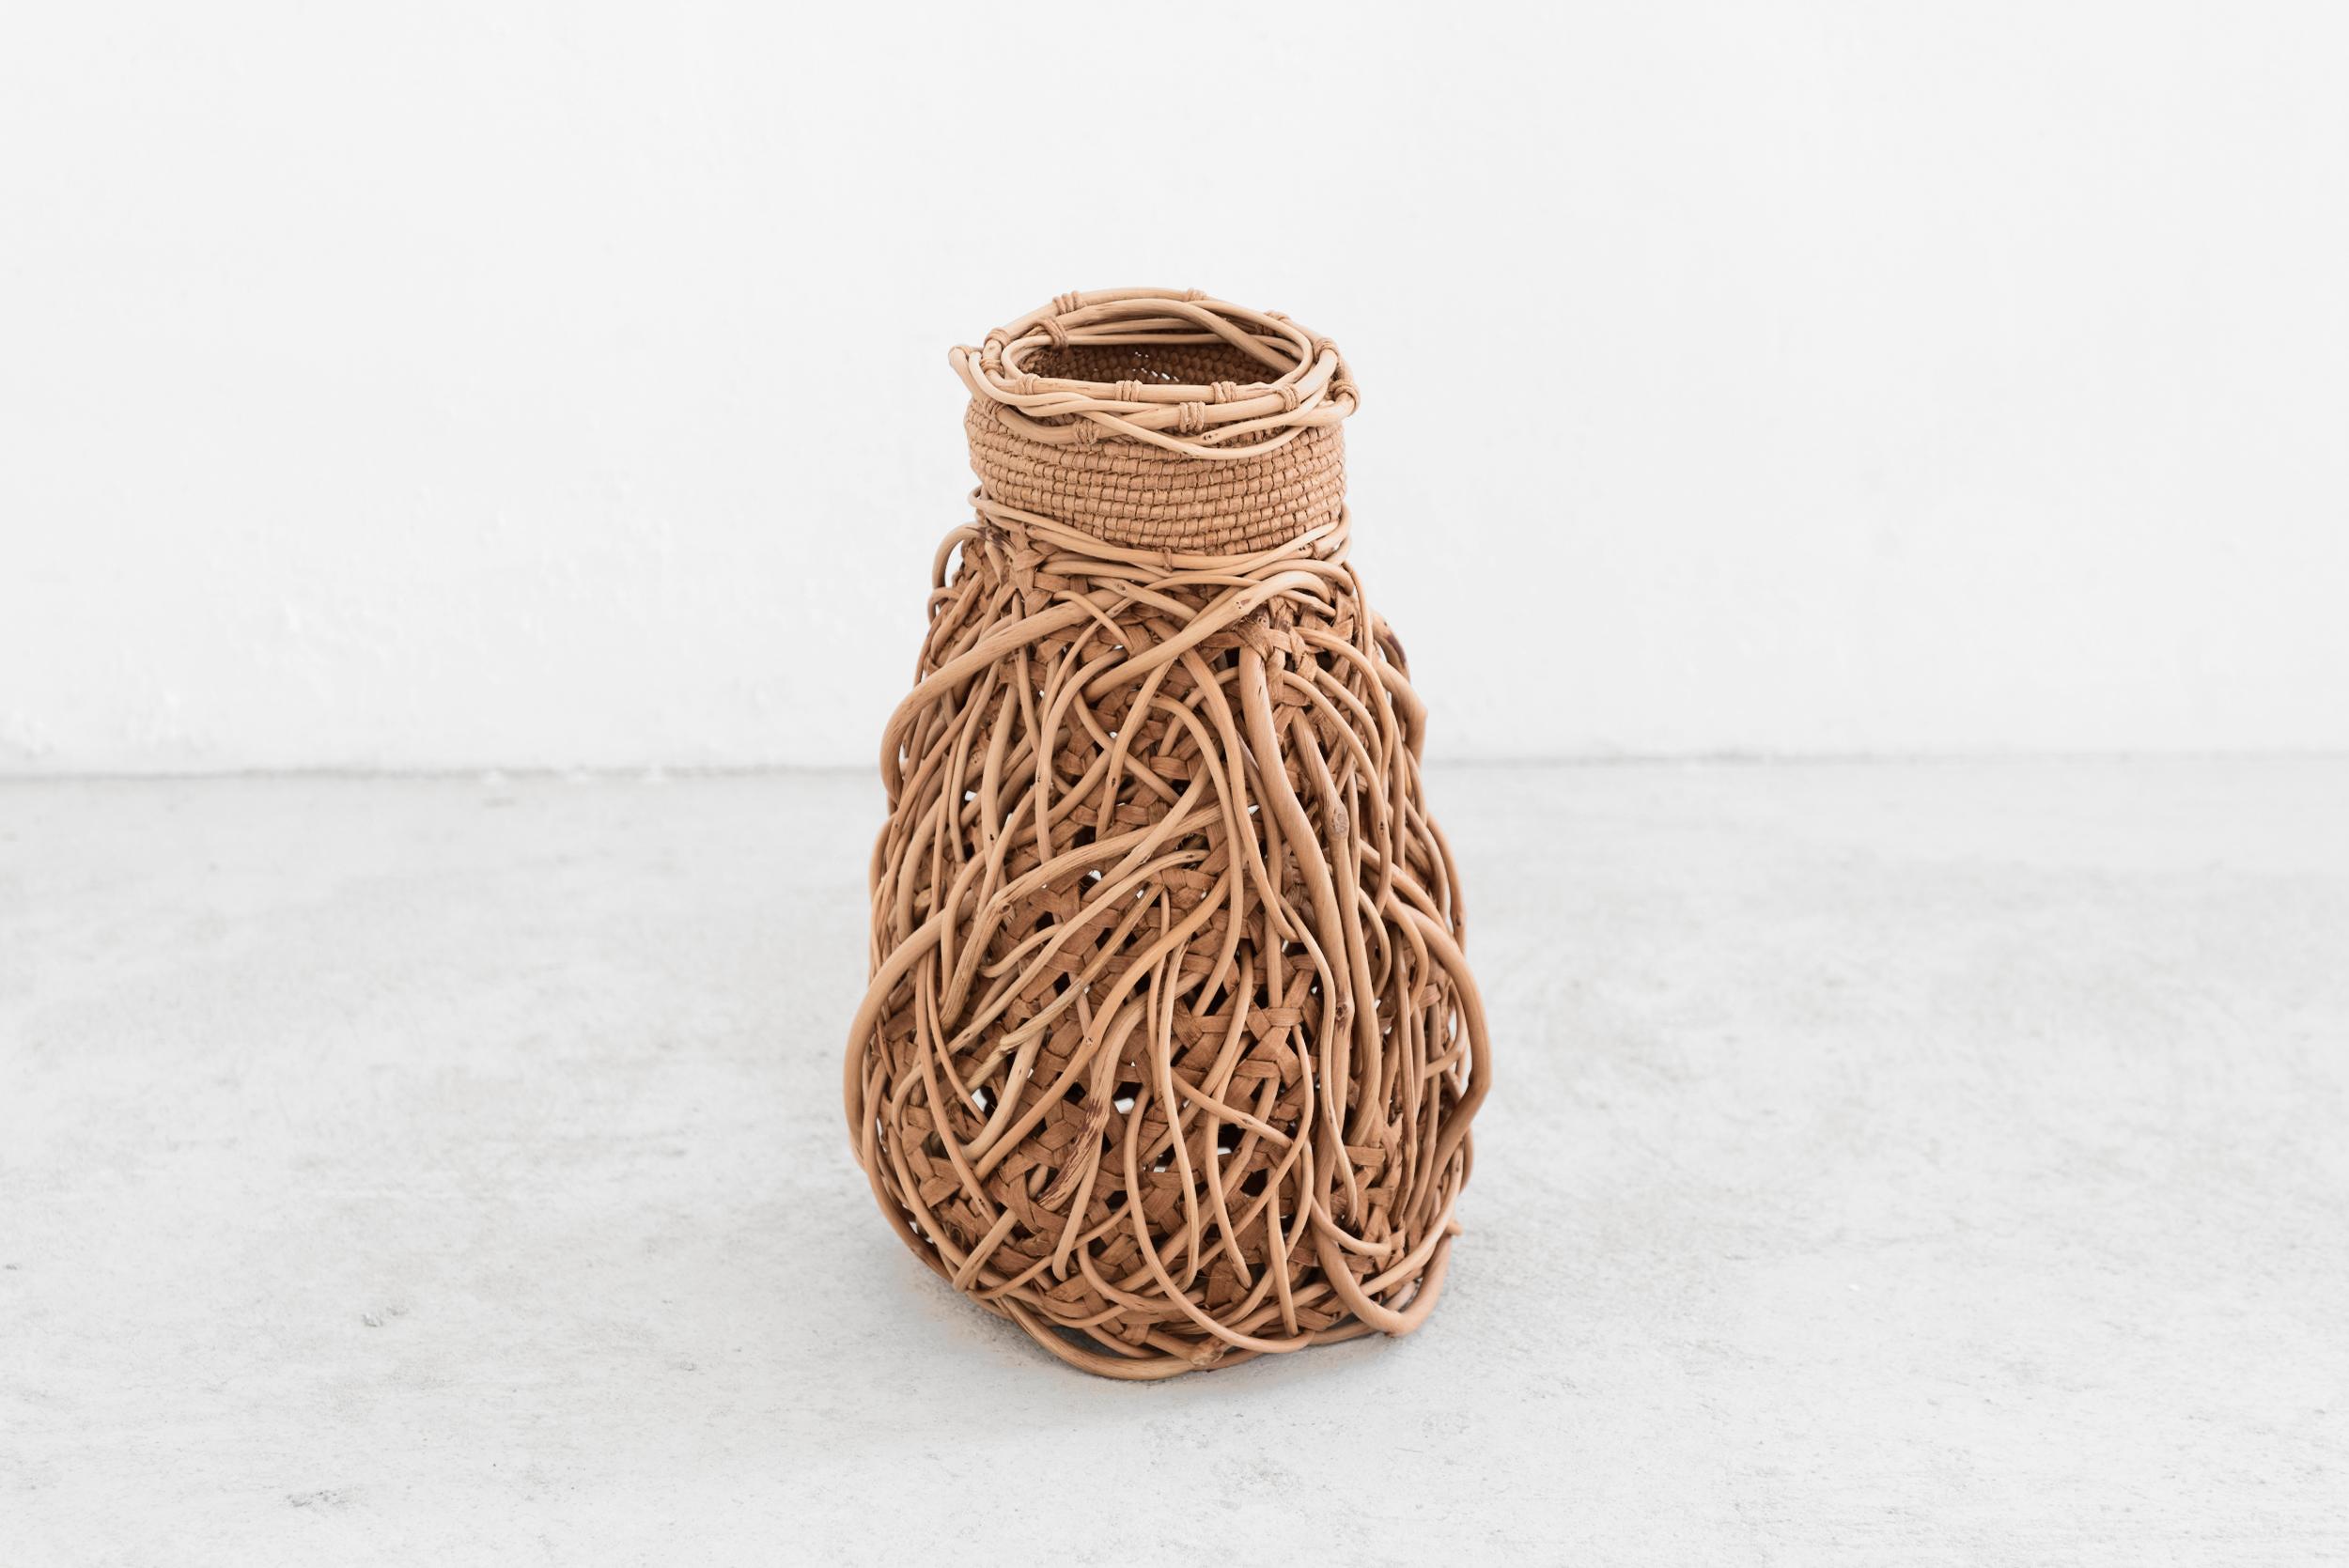 Jennifer Zurick
Entwined
Manufactured by Jennifer Zurick
Produced in exclusive for SIDE GALLERY
Kentucky (USA), 2019
Several materials

BIO
Jennifer Zurick is a self-taught artist specializing in black willow bark which she has been